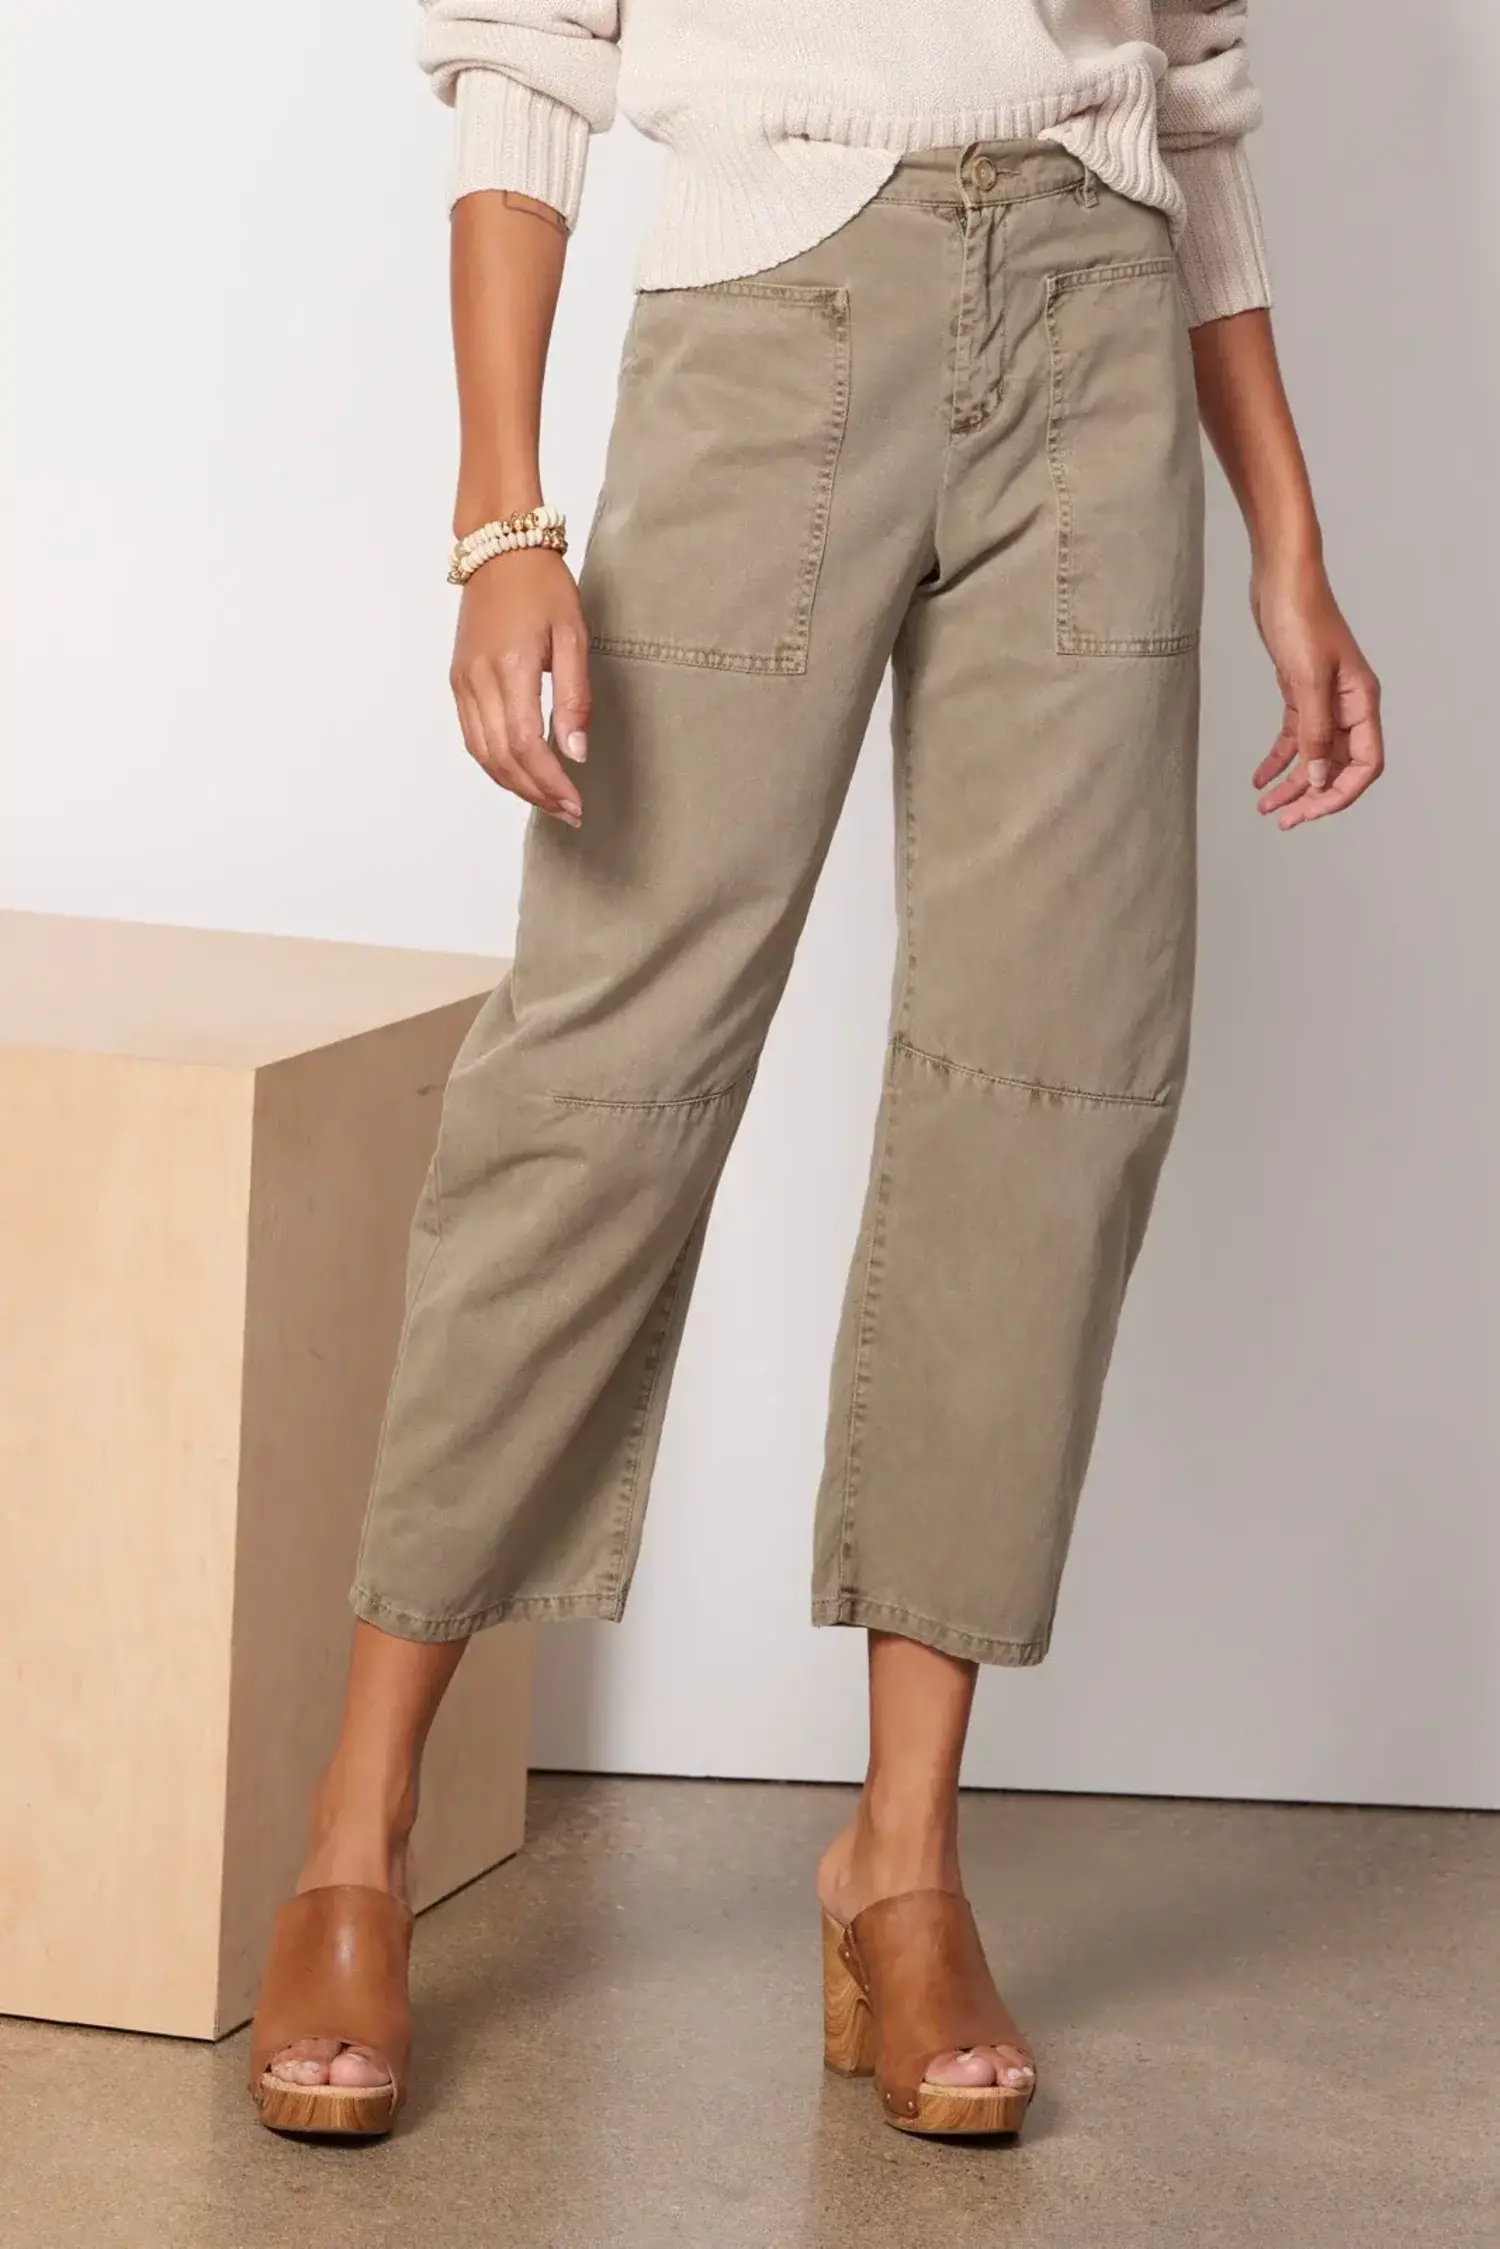 Velvet  Brylie Sanded Twill Pant Pike - Tryst Boutique